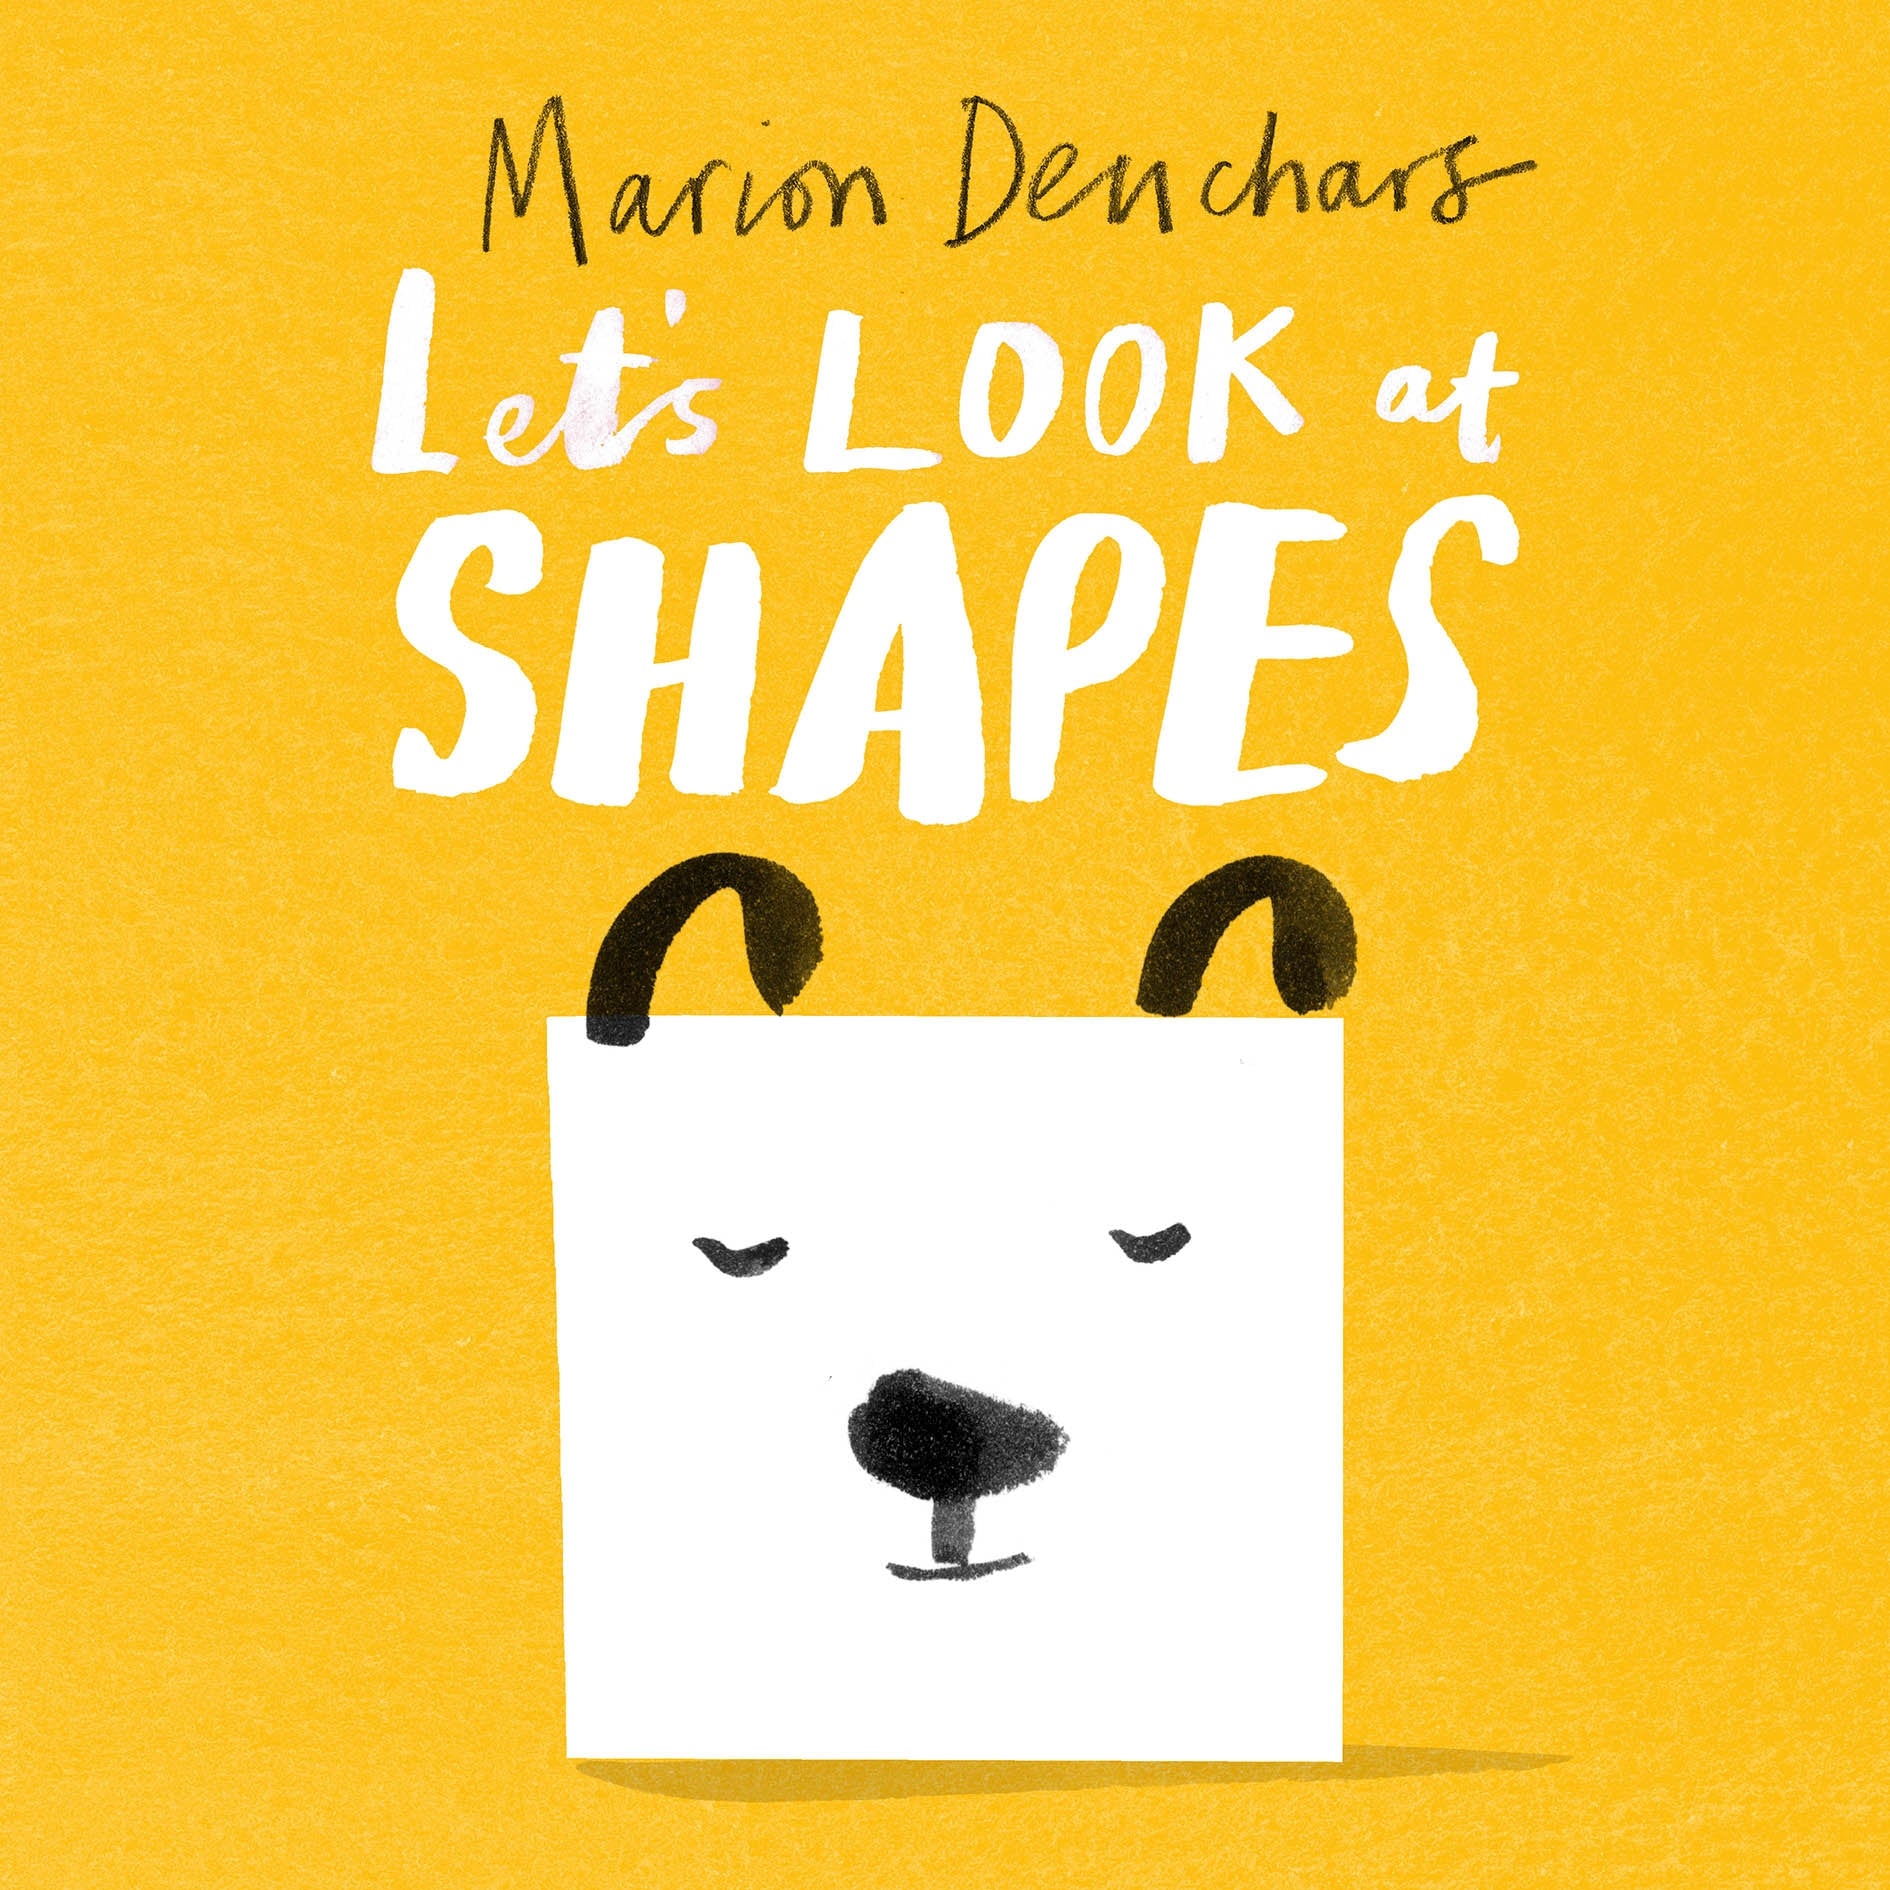 Let's Look at... Shapes by Marion Deuchars